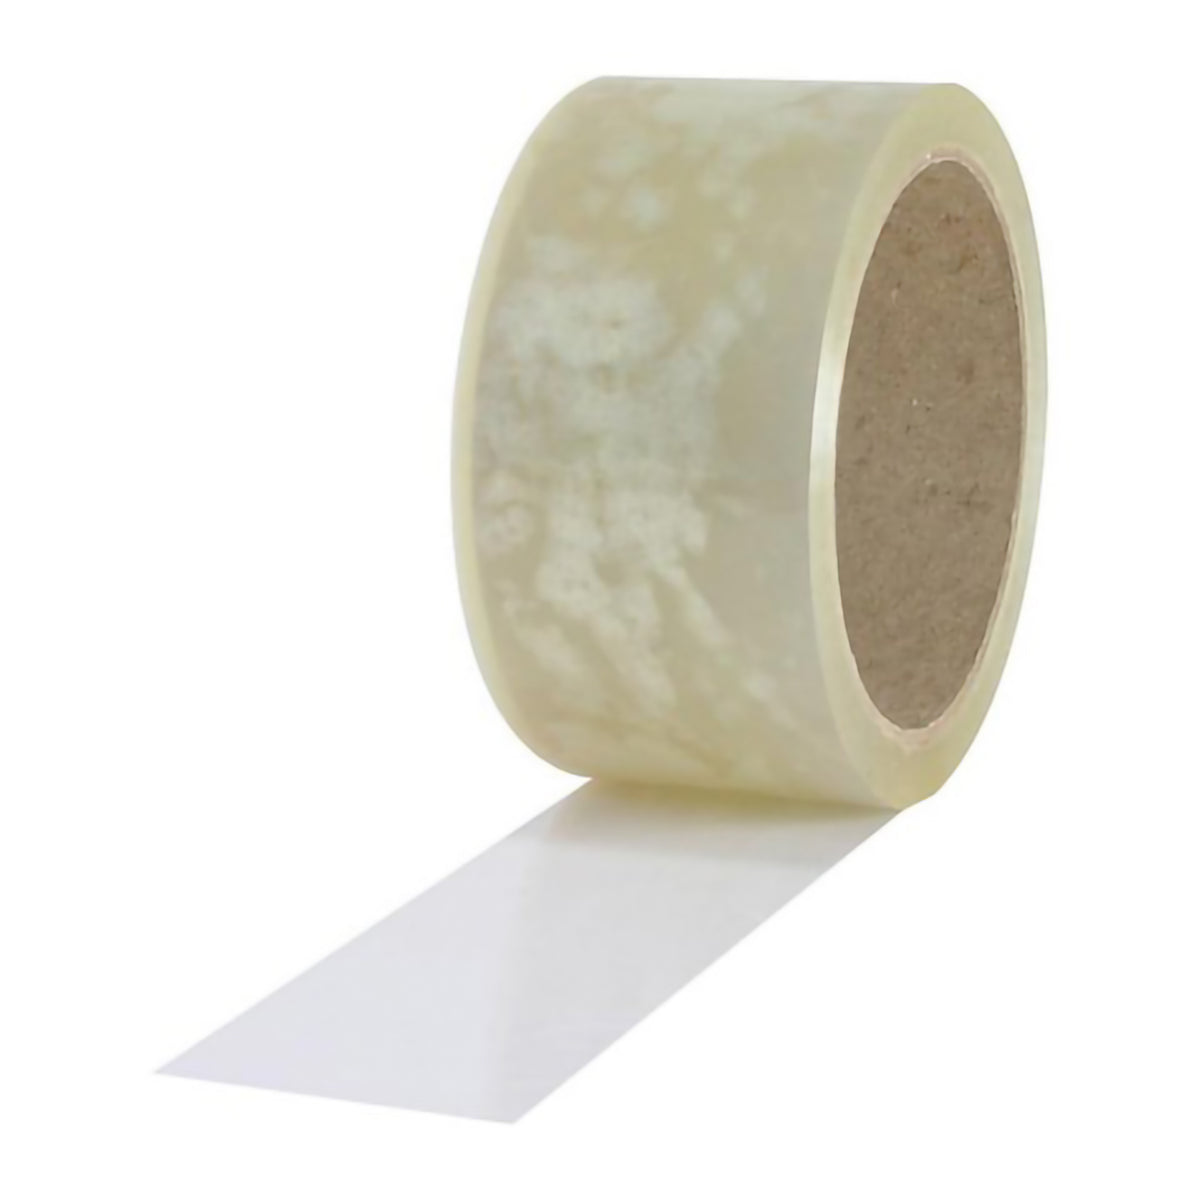 XEHAHOSH 3 Rolls Thin Double-Sided Tape for Crafts Arts  ScrapbookingPhotograp